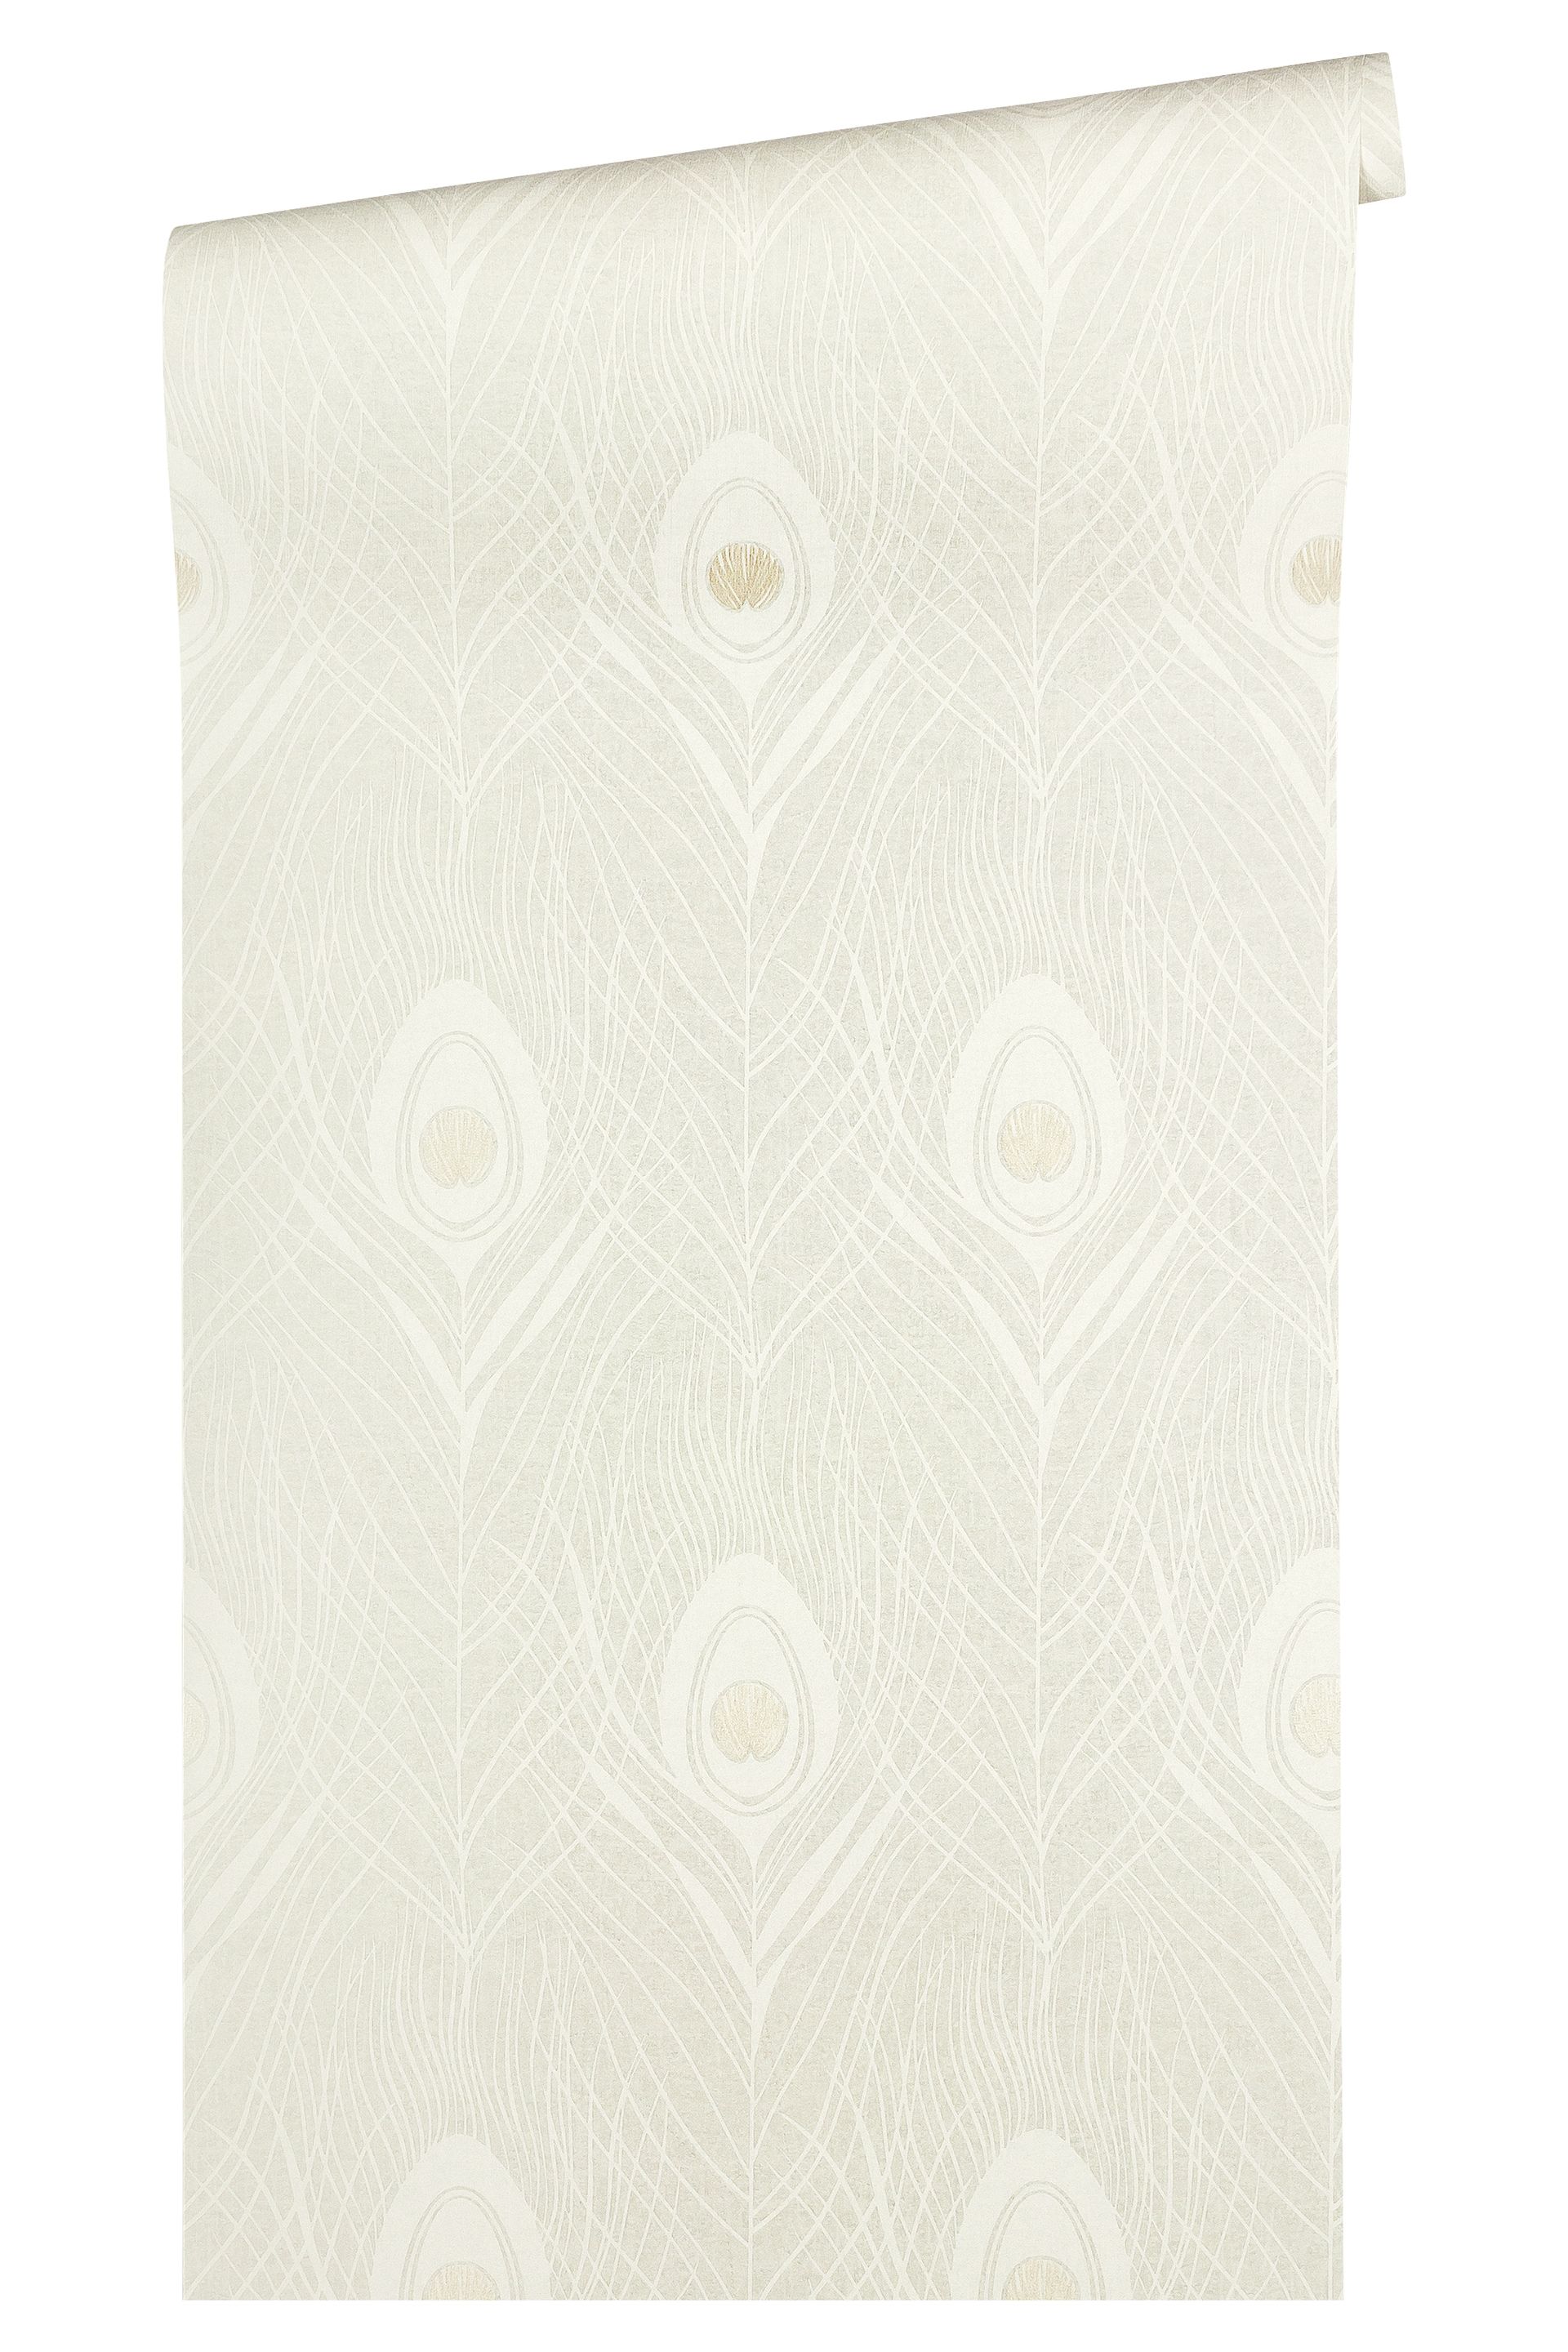 Architects Paper Absolutely Chic, Tapete mit Federn, beige, gold 369711